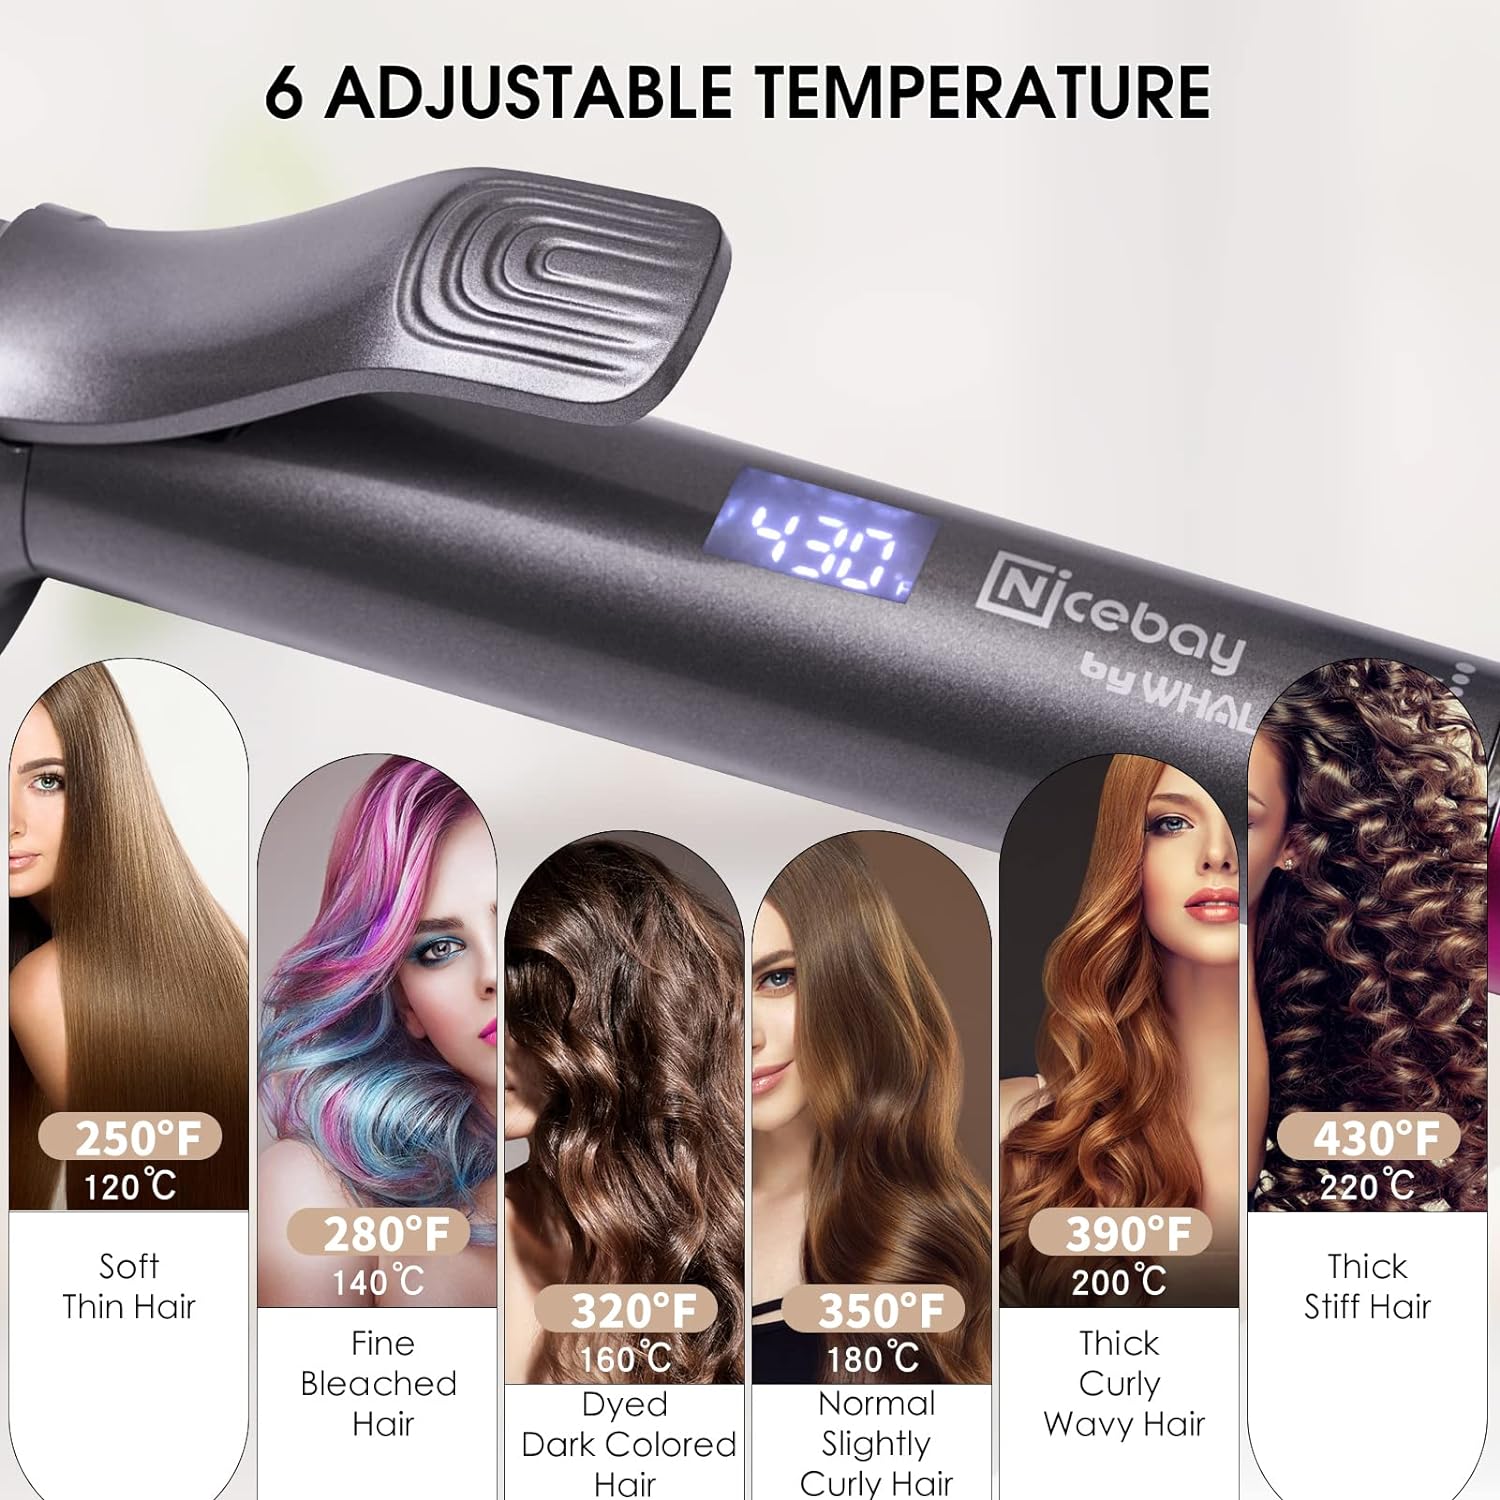 NICEBAY® DW-6010/A Curling Iron,1 1/4 Inch Hair Curling Iron with Ceramic Coating, Professional Curling Wand, Fast Heating up to 430°F, Temperature LED Display, Wide Voltage for Worldwide, 60 Mins Auto Off